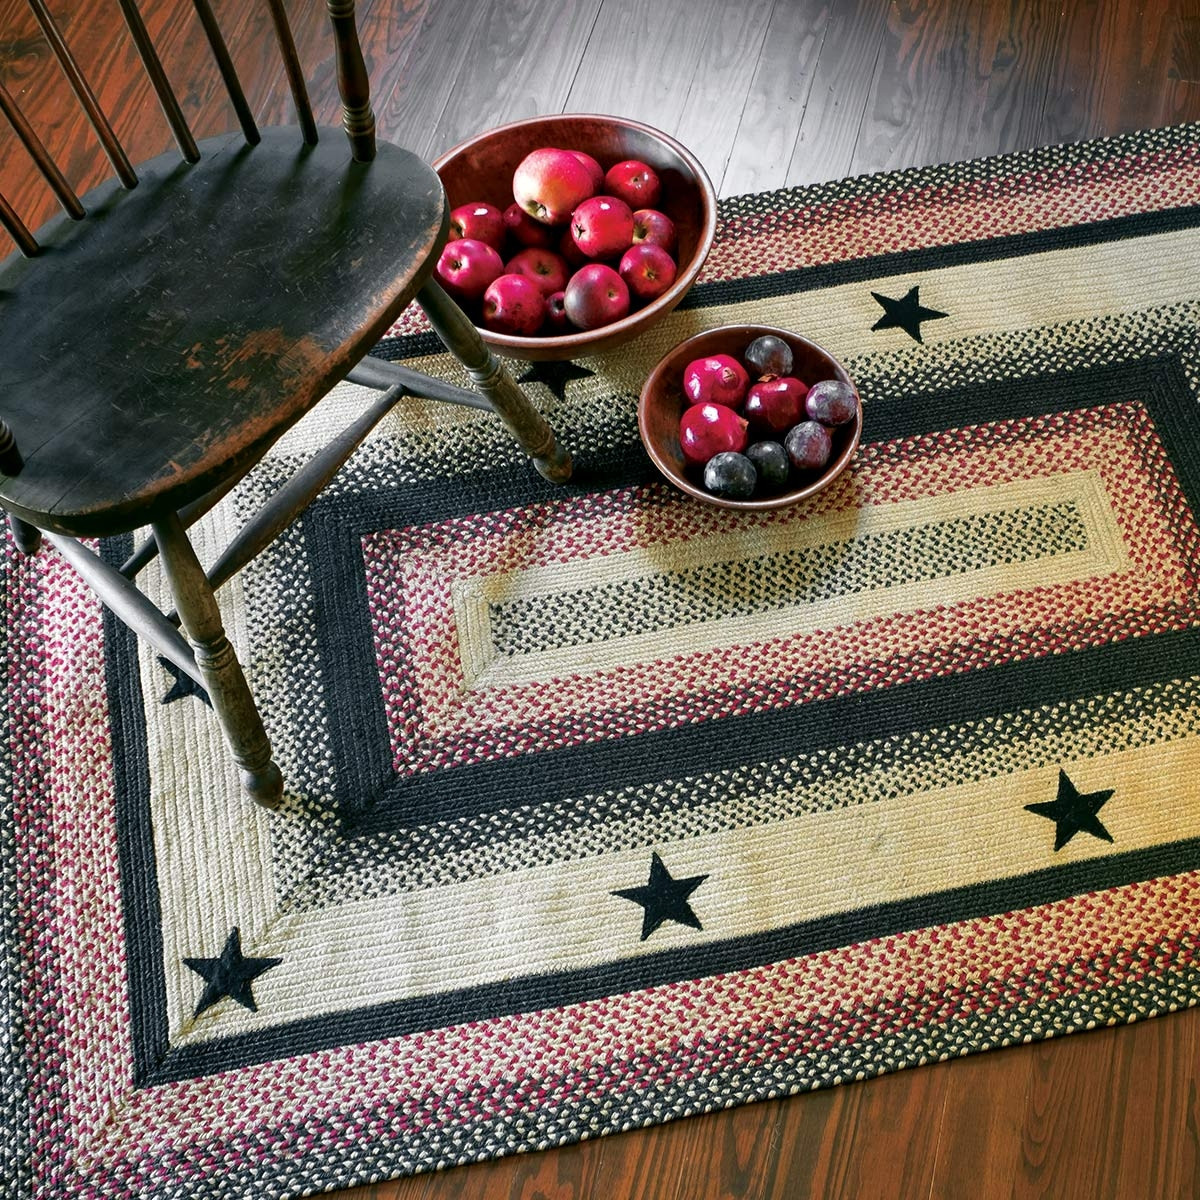 Picture of Homespice Decor 571755 11 x 36 in. Primitive Star Gloucester Oval Table Runner - Multicolor